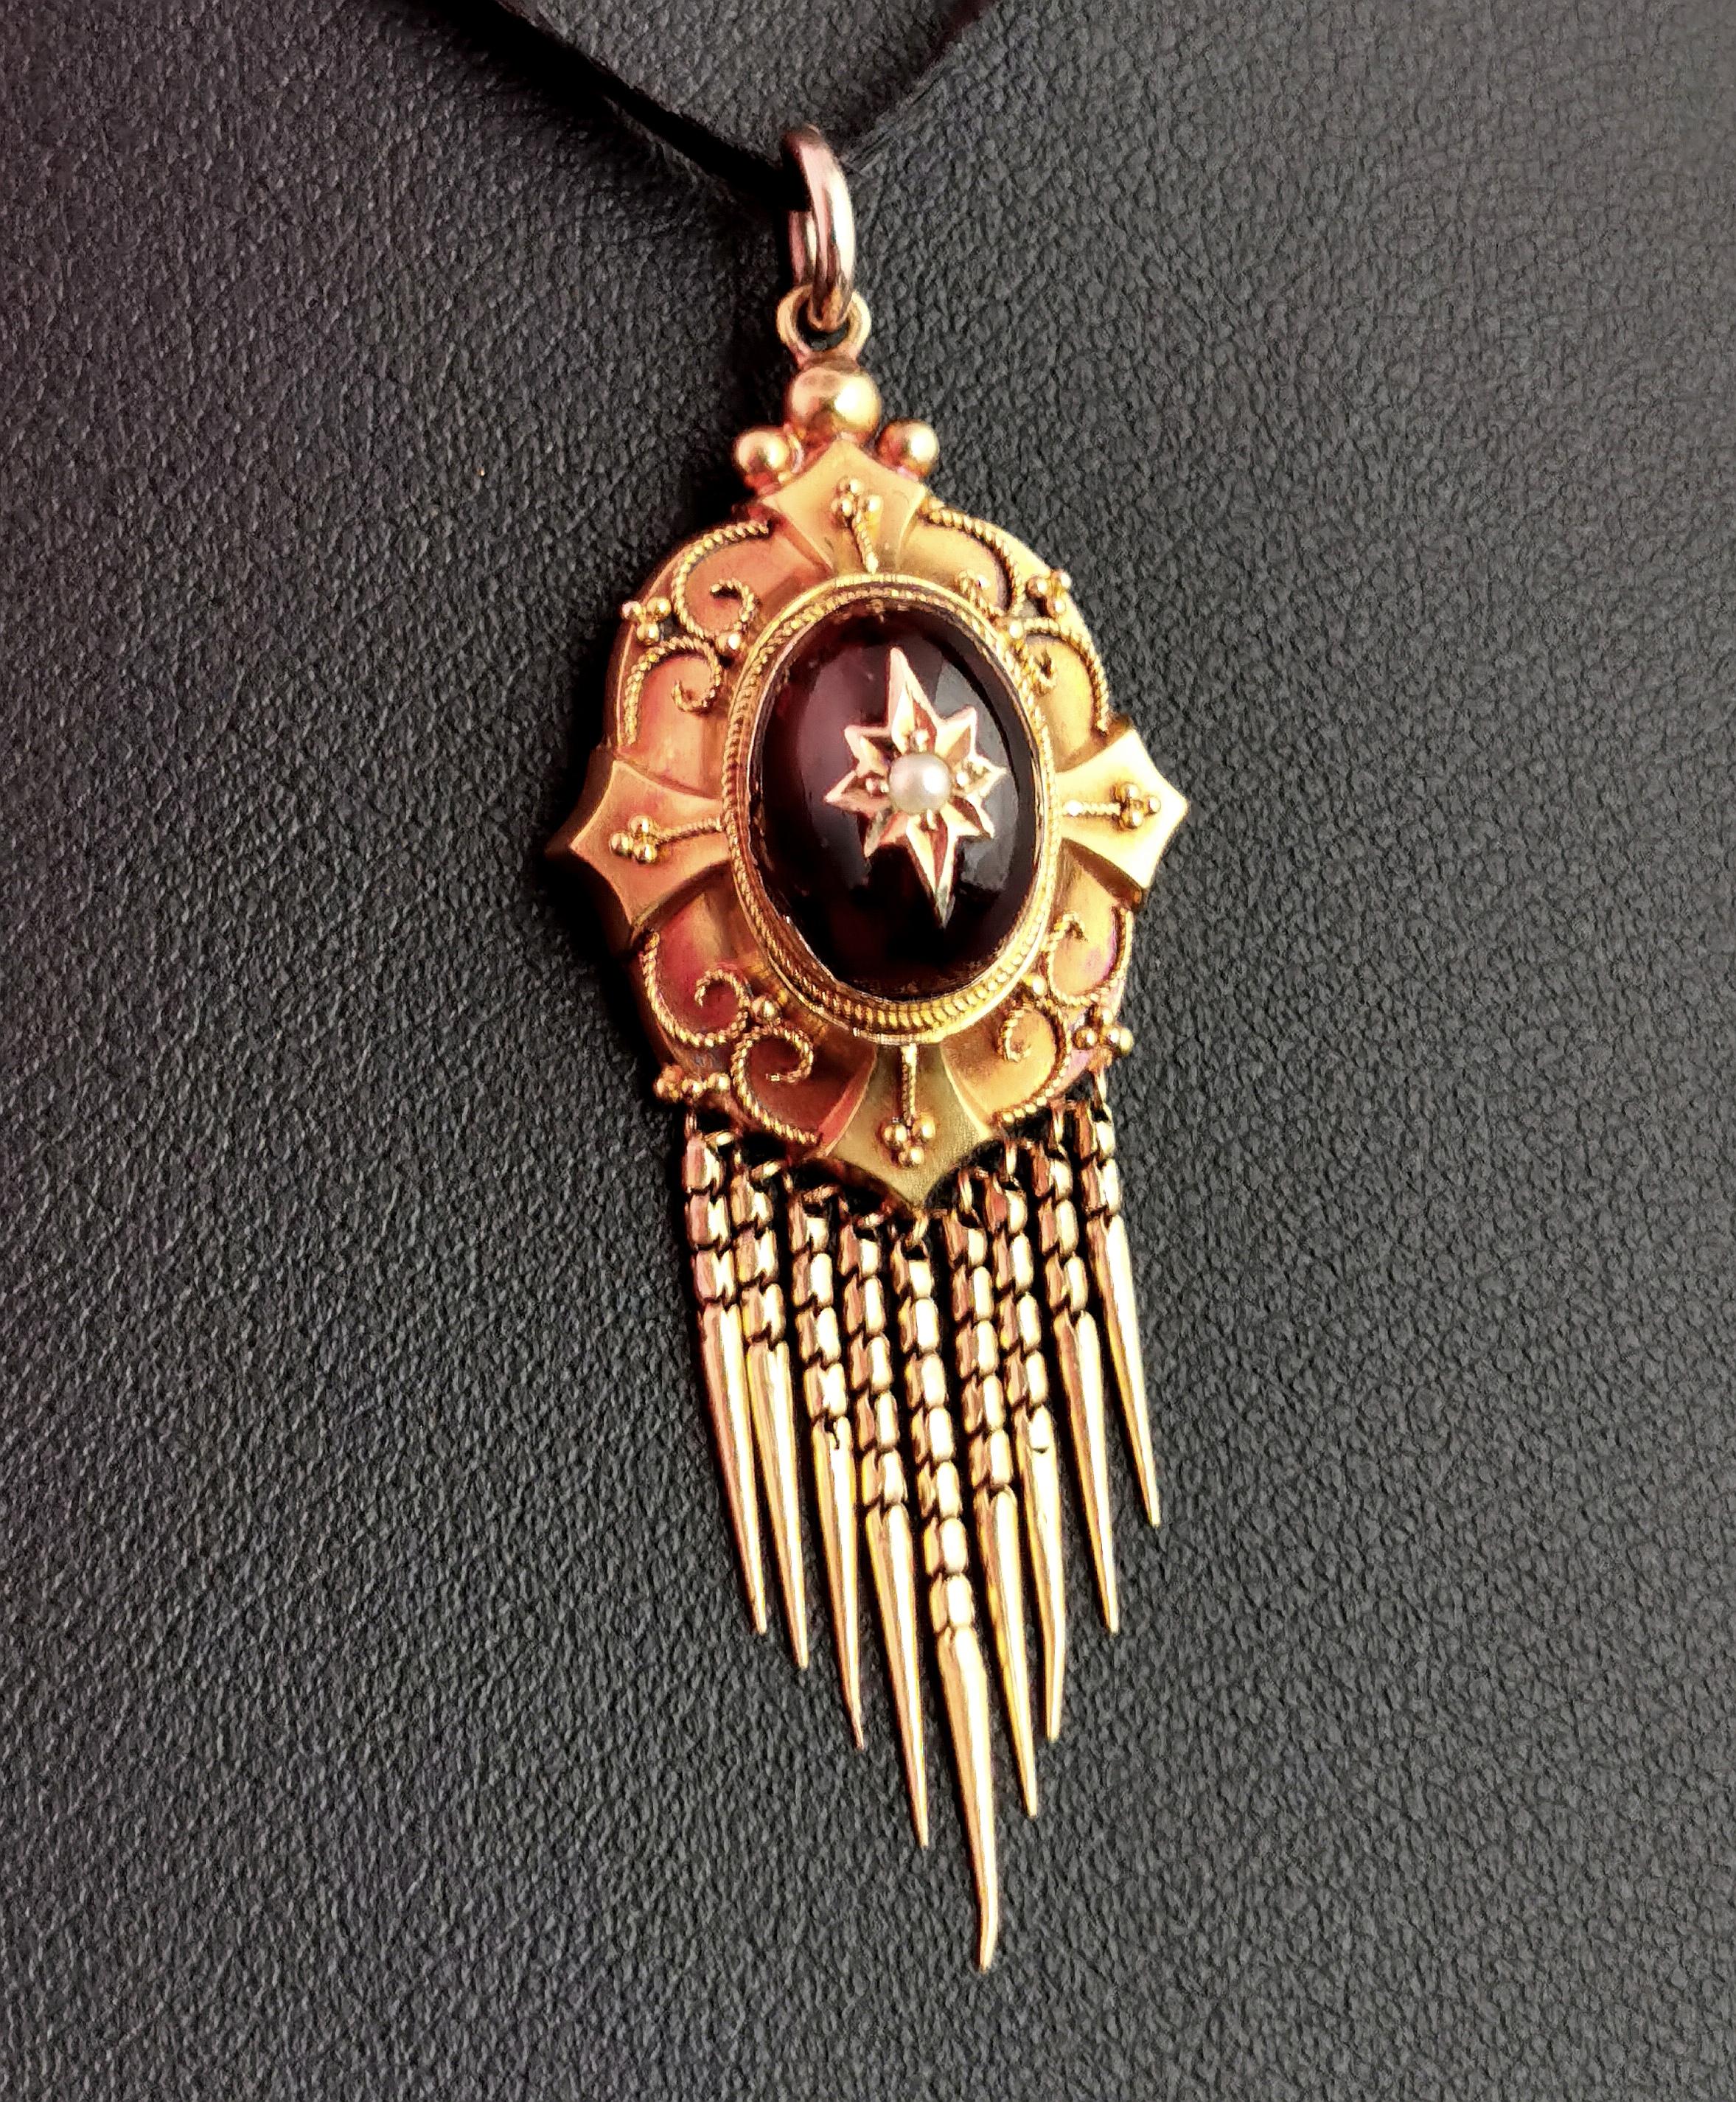 A beautiful antique, Victorian cabochon garnet and pearl tassel pendant.

The pendant is crafted from bloomed 9ct yellow gold, elaborately designed with reeded and beaded border housing a stunning rich bohemian garnet cabochon.

The pendant has a